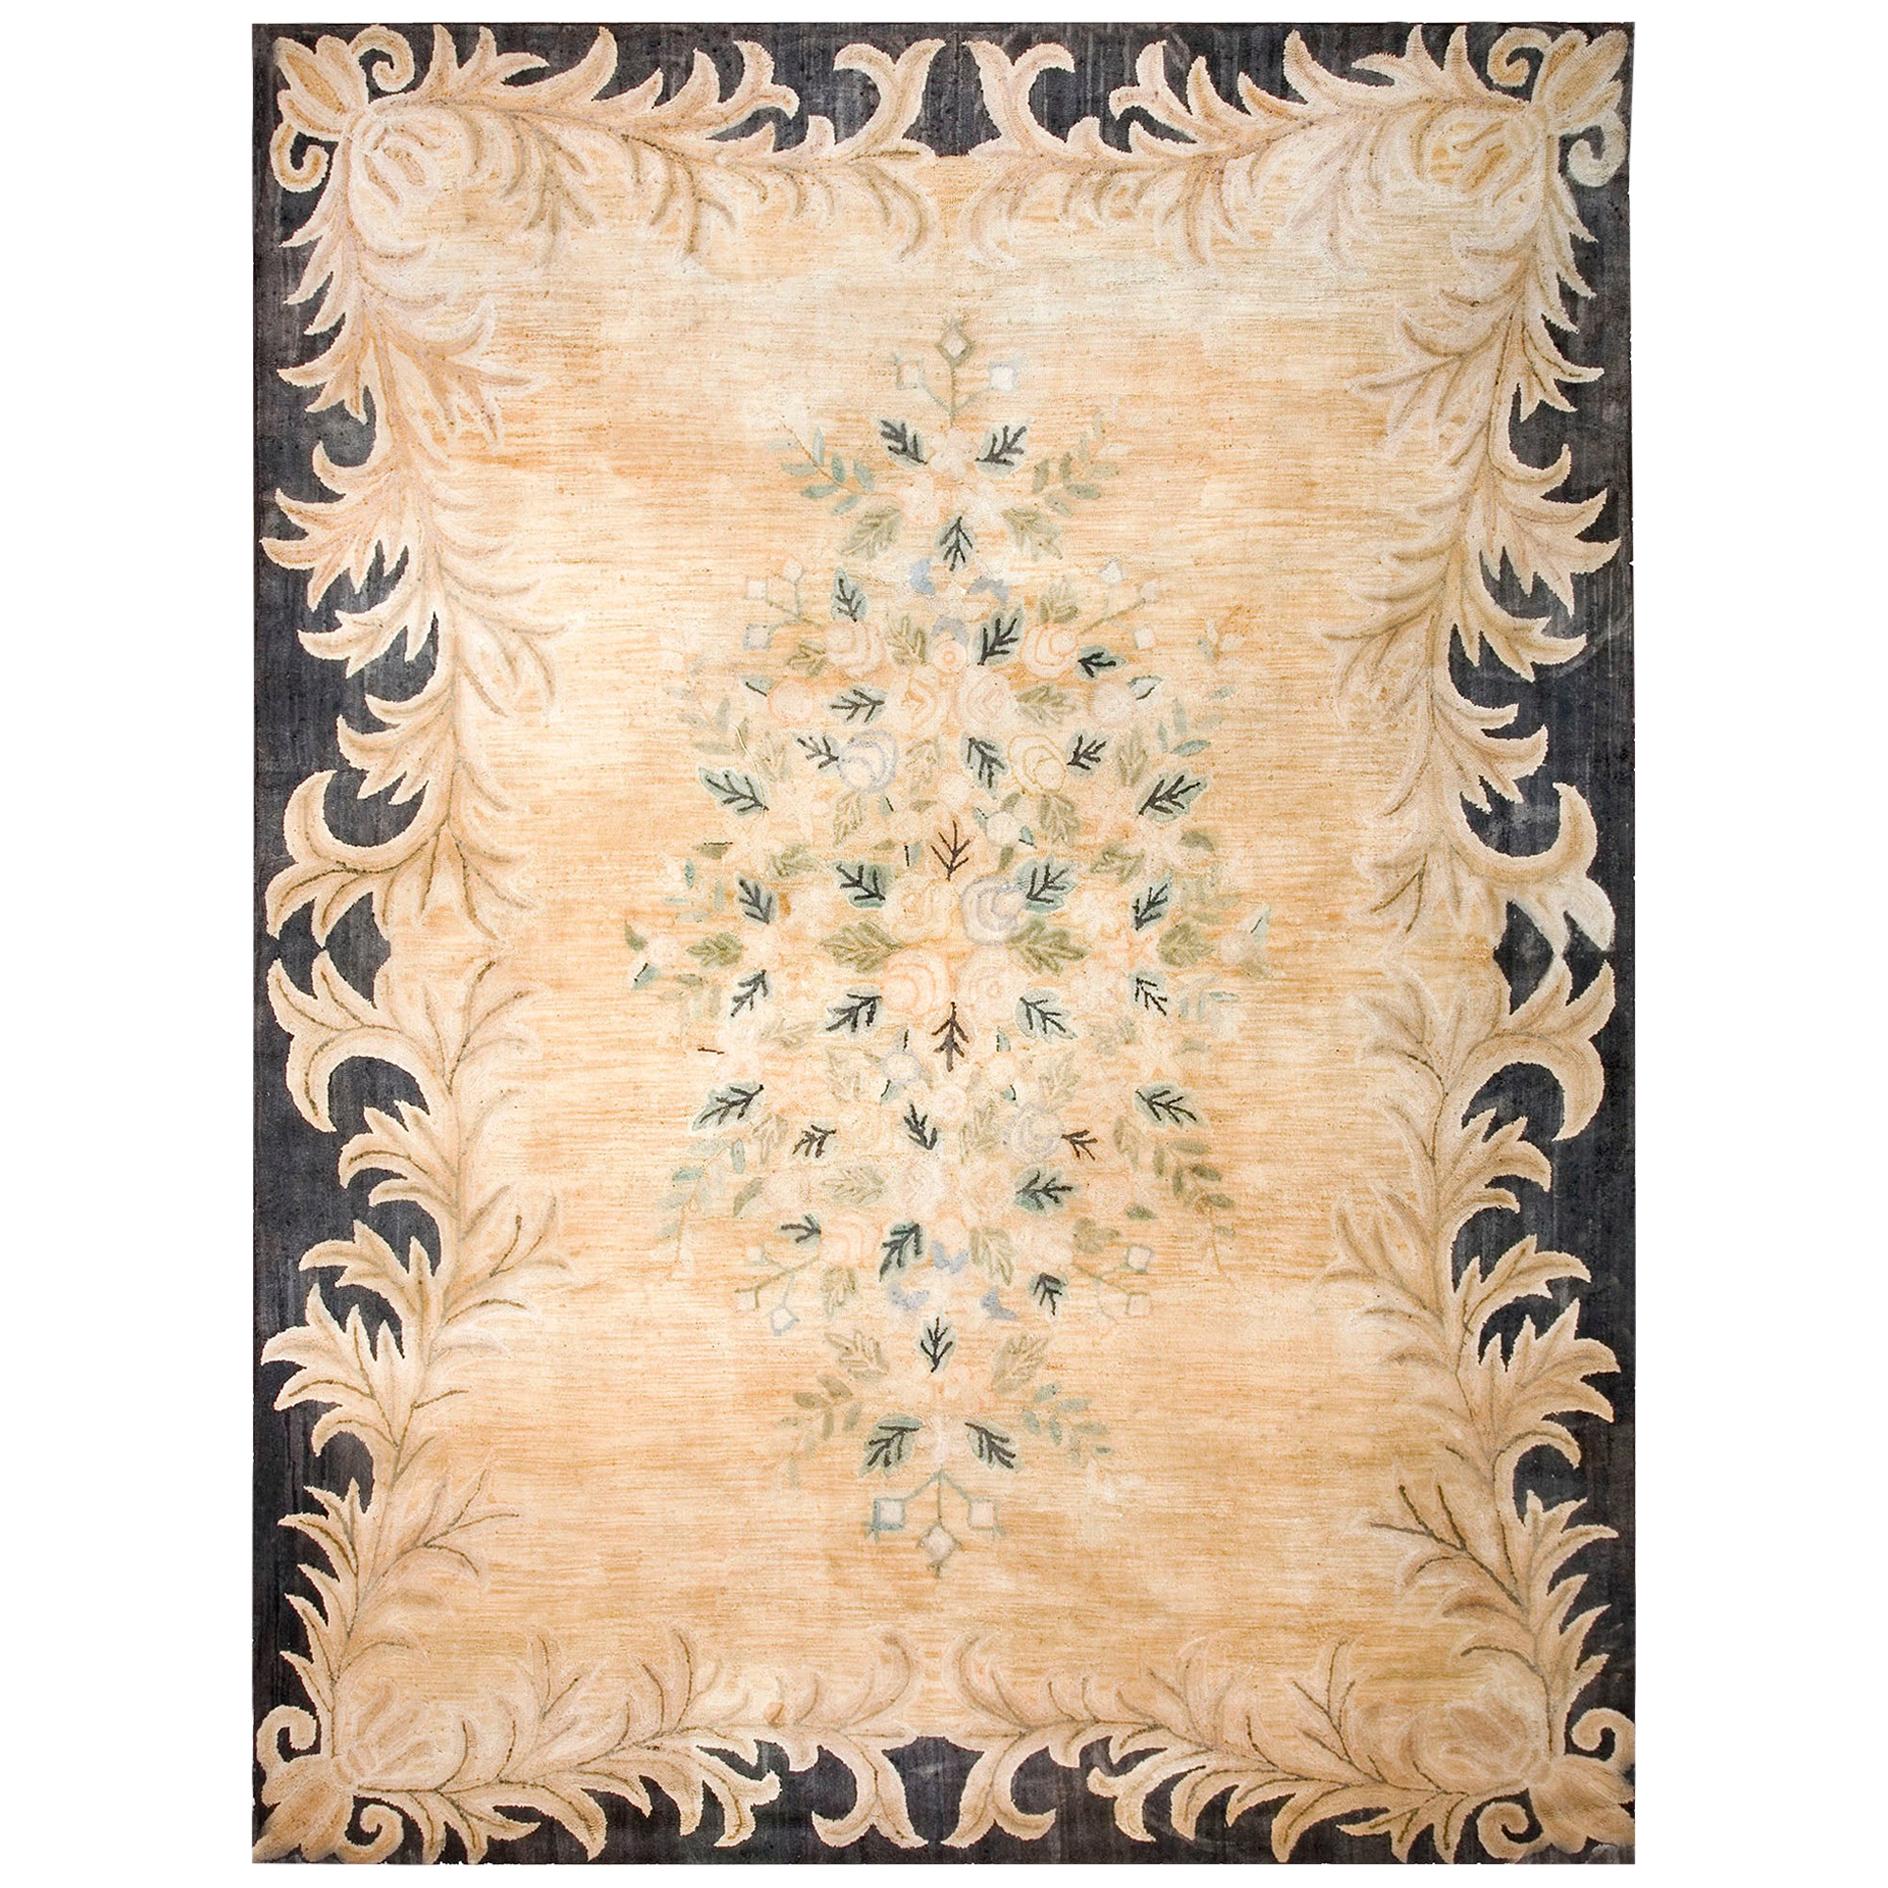 Early 20th Century American Hooked Rug ( 9'2" x 12'1" - 280 x 368 ) For Sale